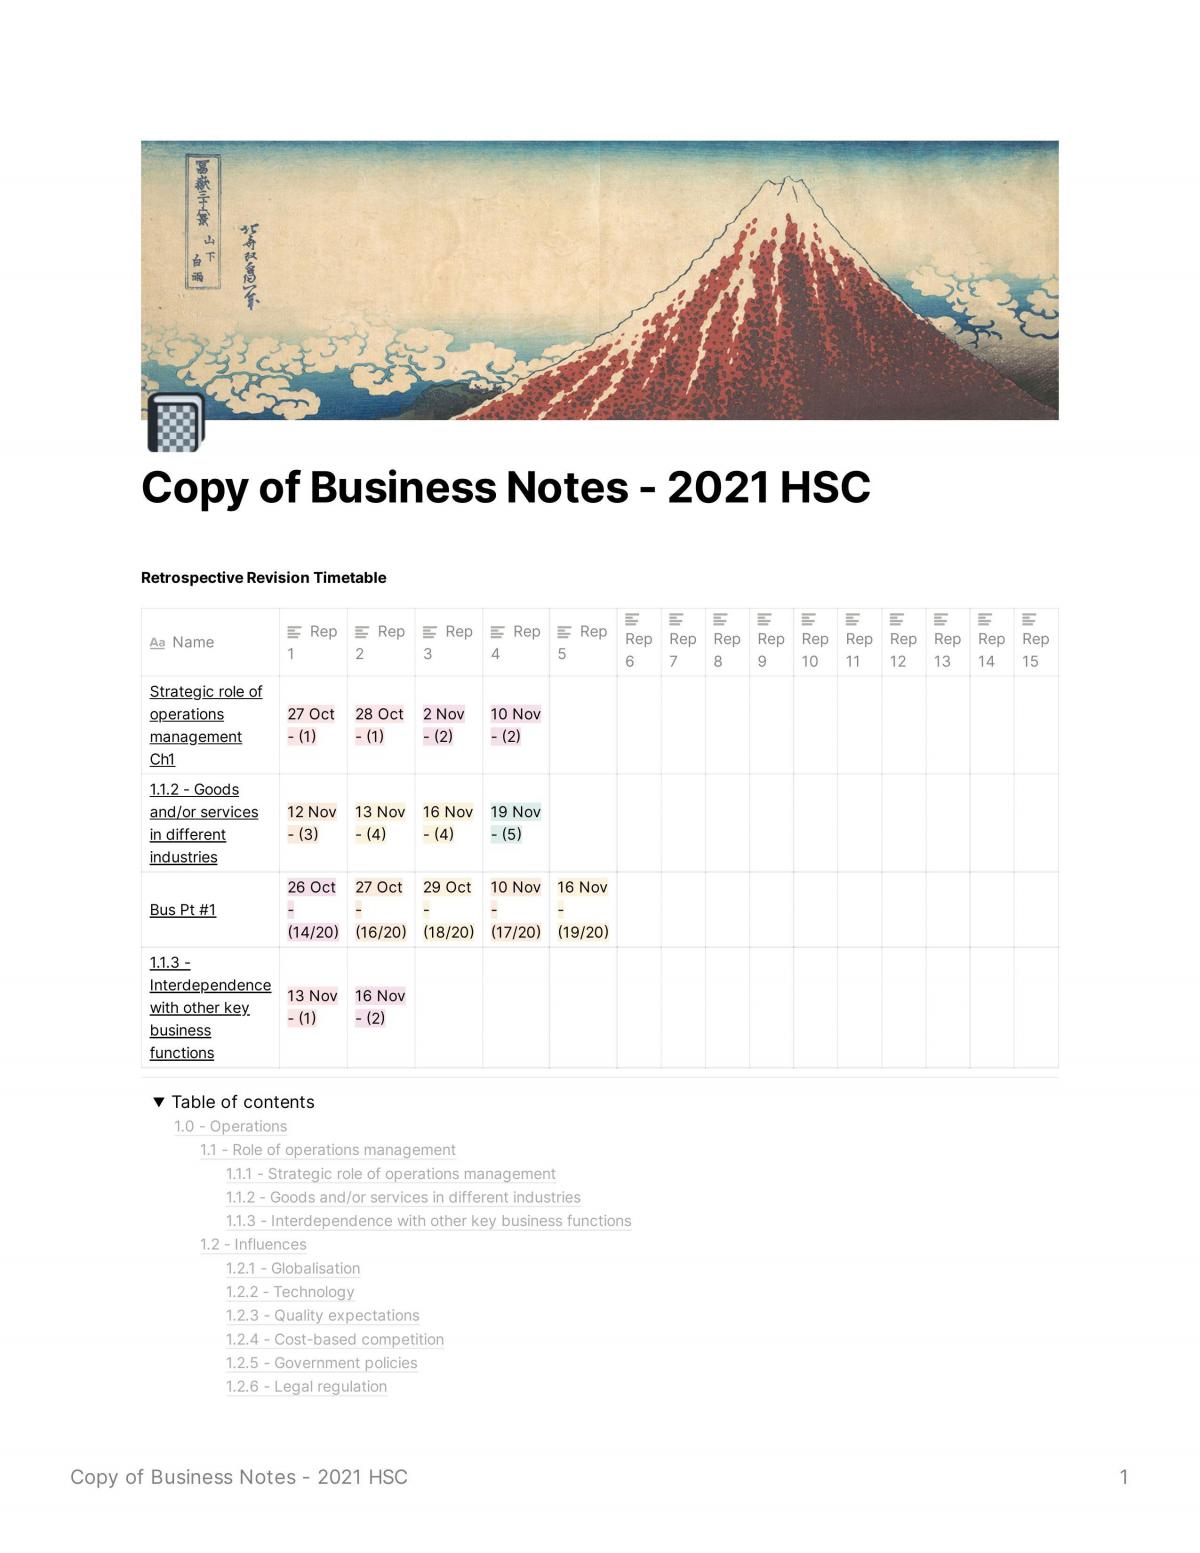 Business Notes - 2021 HSC - Page 1